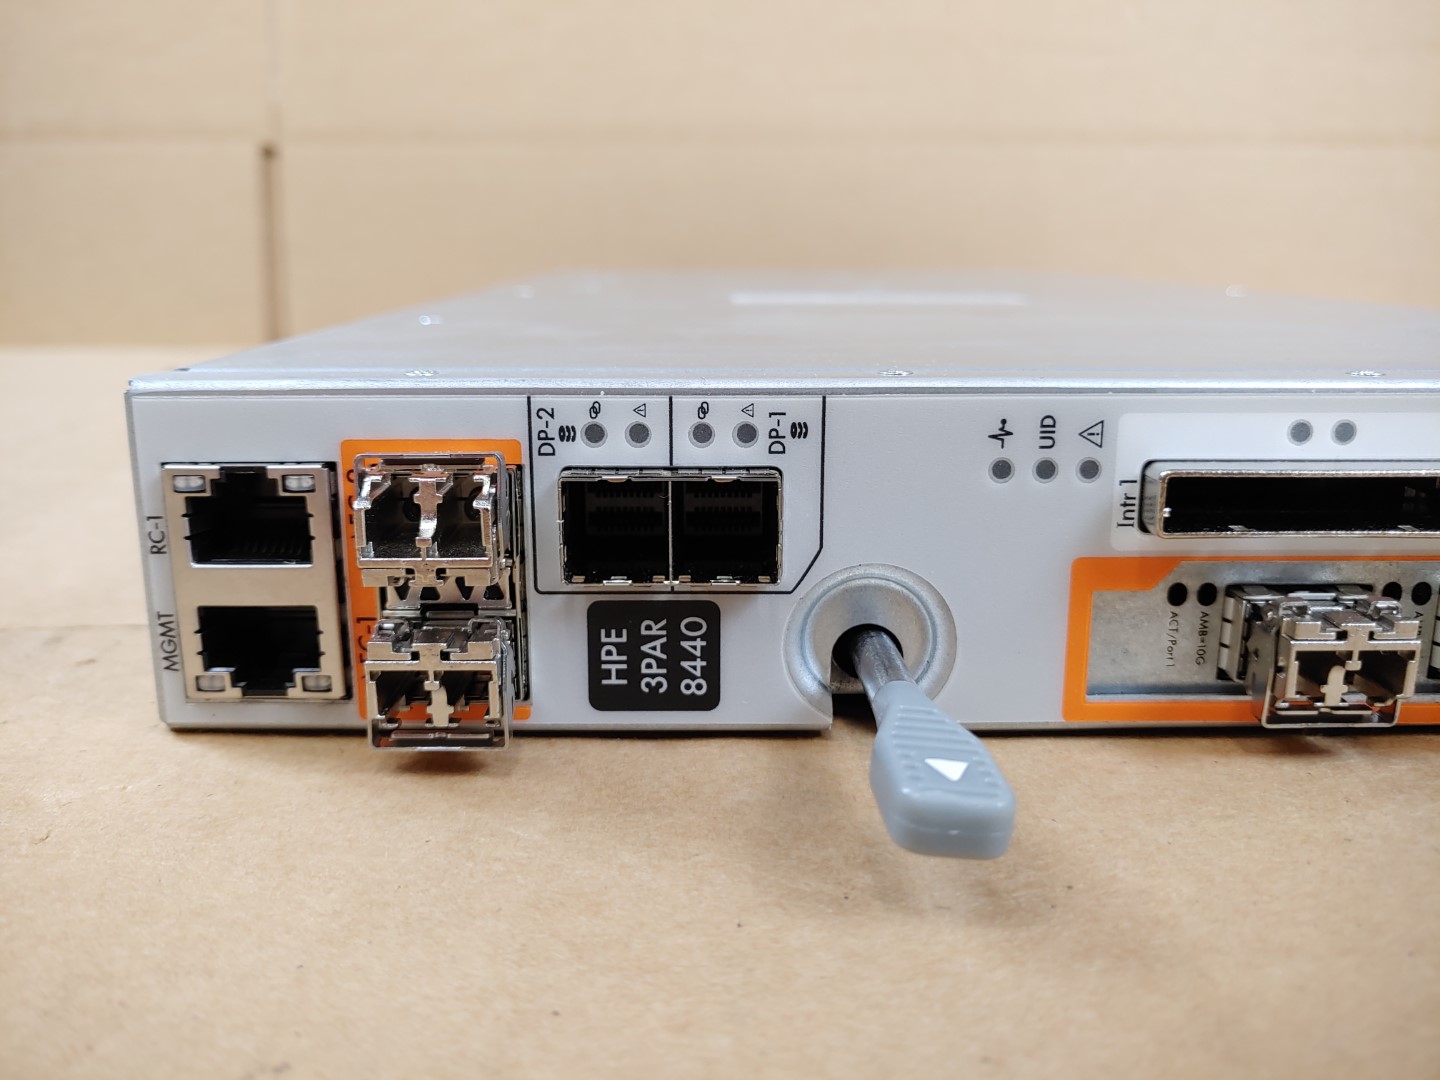 Excellent Condition! Tested and Pulled from a working environment! Item Specifics: MPN : 792654-001UPC : N/ABrand : HP HPEModel : H6Y97-63001 / 792654-001Type : Controller NodeProduct Line : HPE - 2